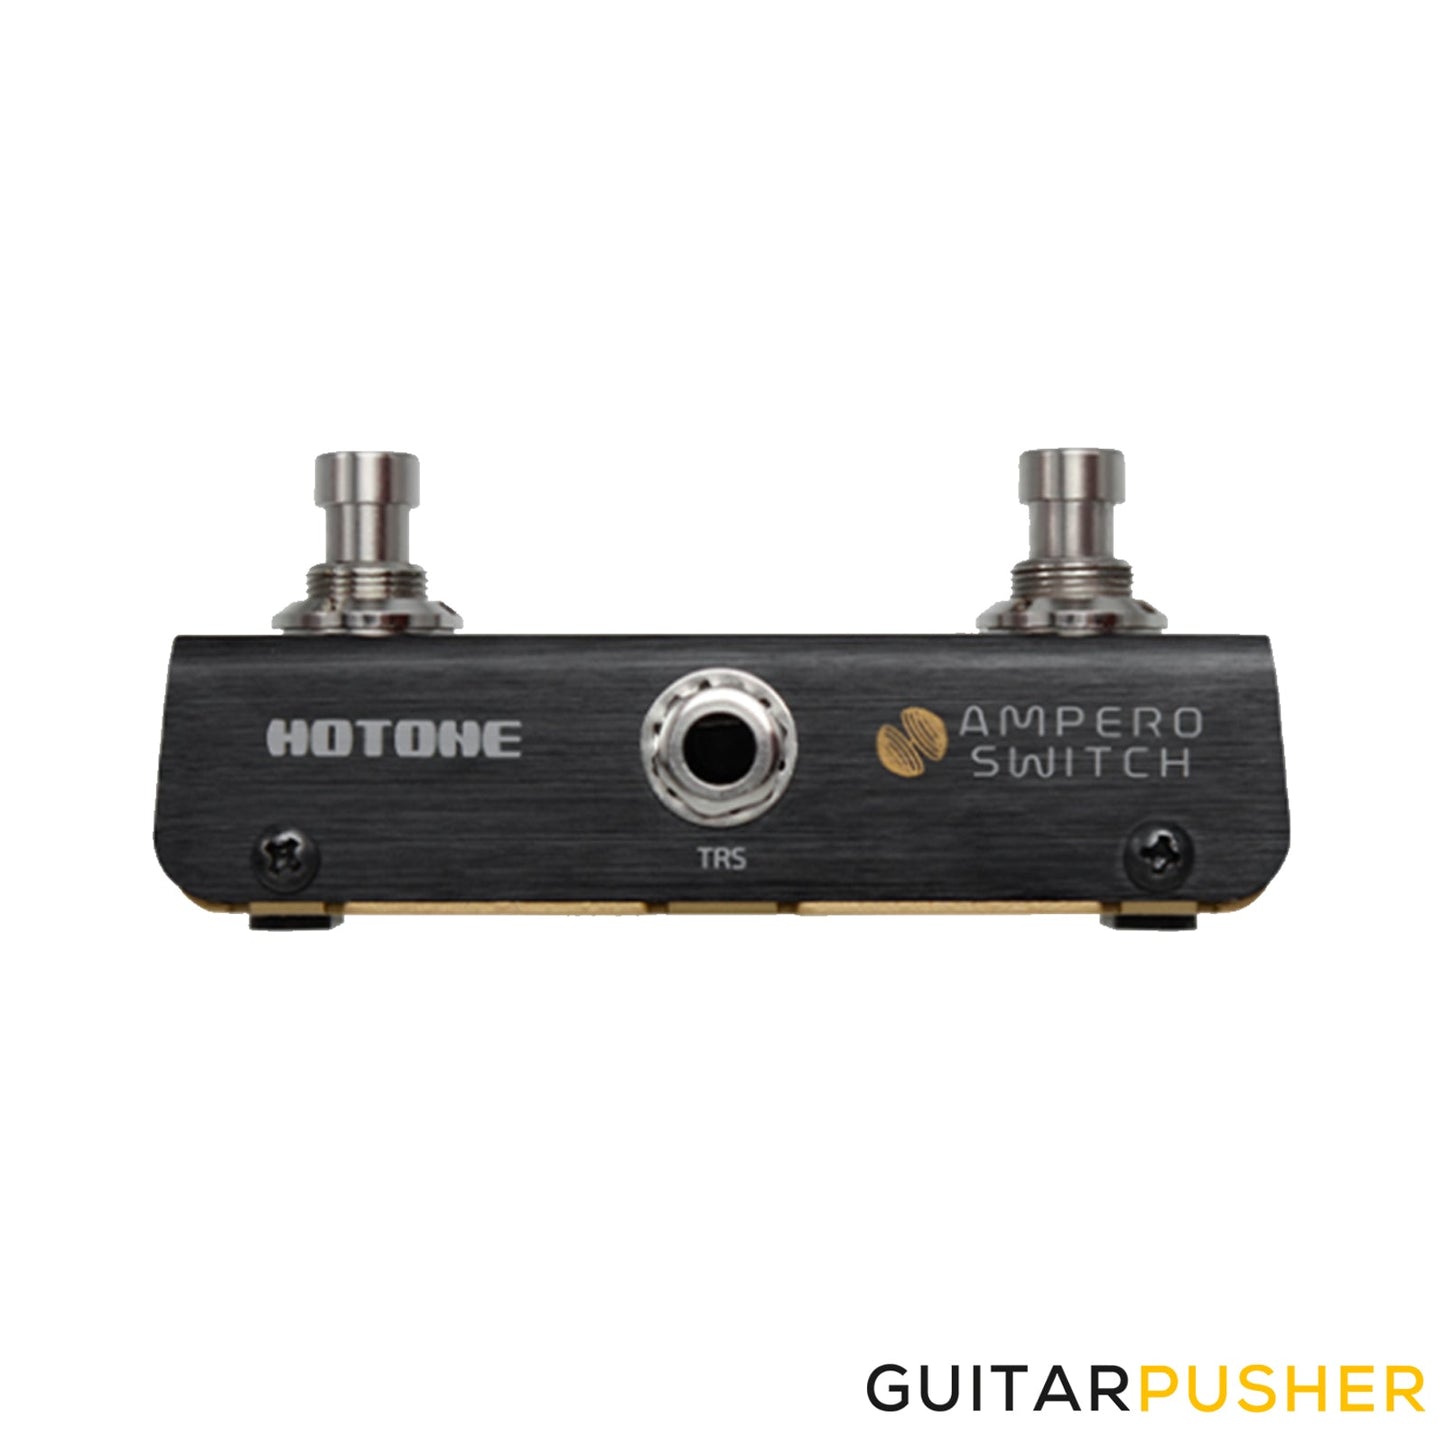 Hotone FS-1 Ampero Switch 2-Way Momentary Dual Footswitch